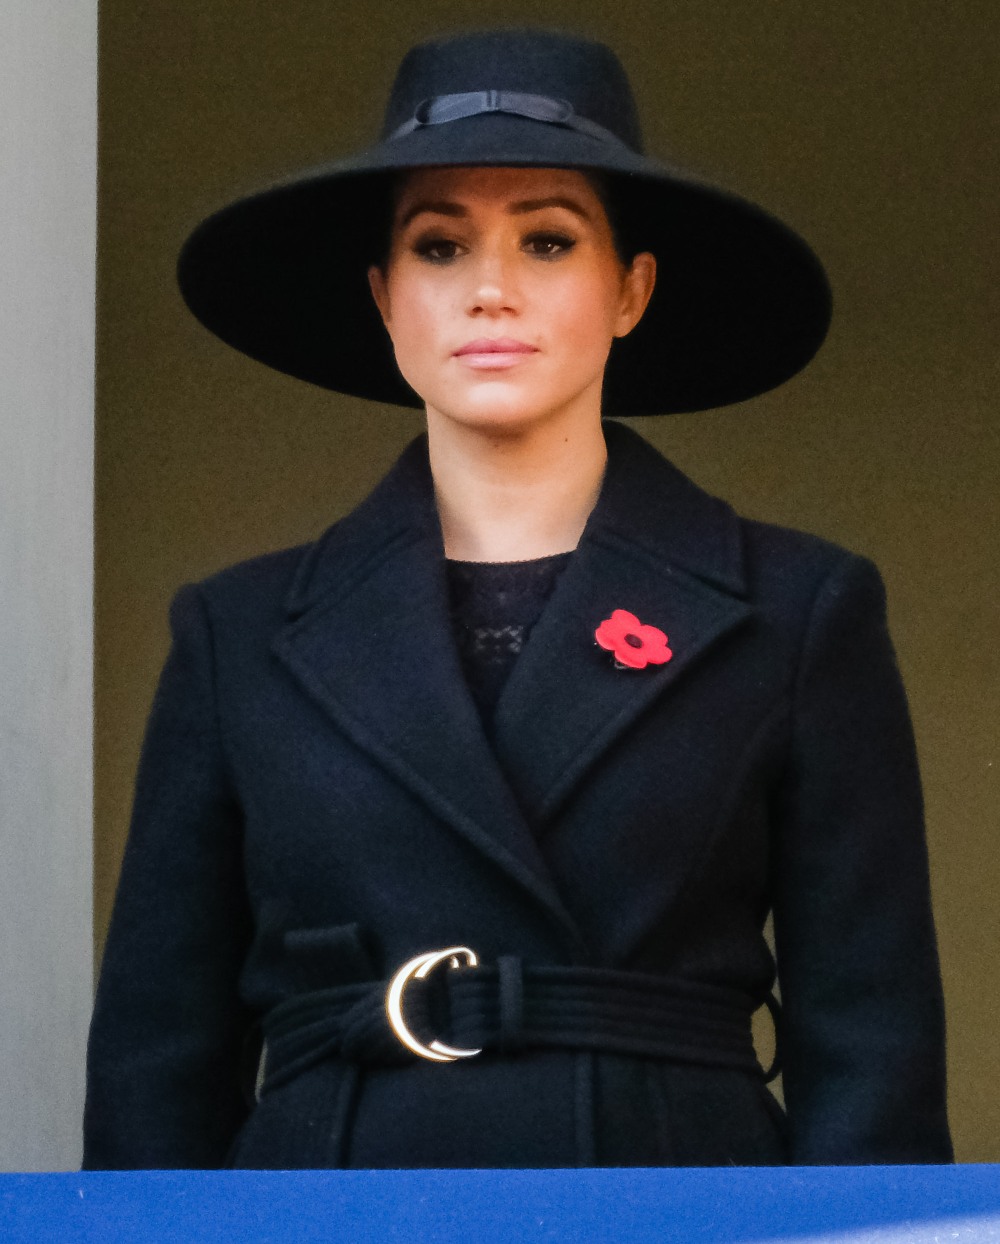 Meghan, Duchess of Sussex and HRH The Countess of Wessex attends the National Service of Remembrance at the Cenotaph on Sunday 10 November 2019